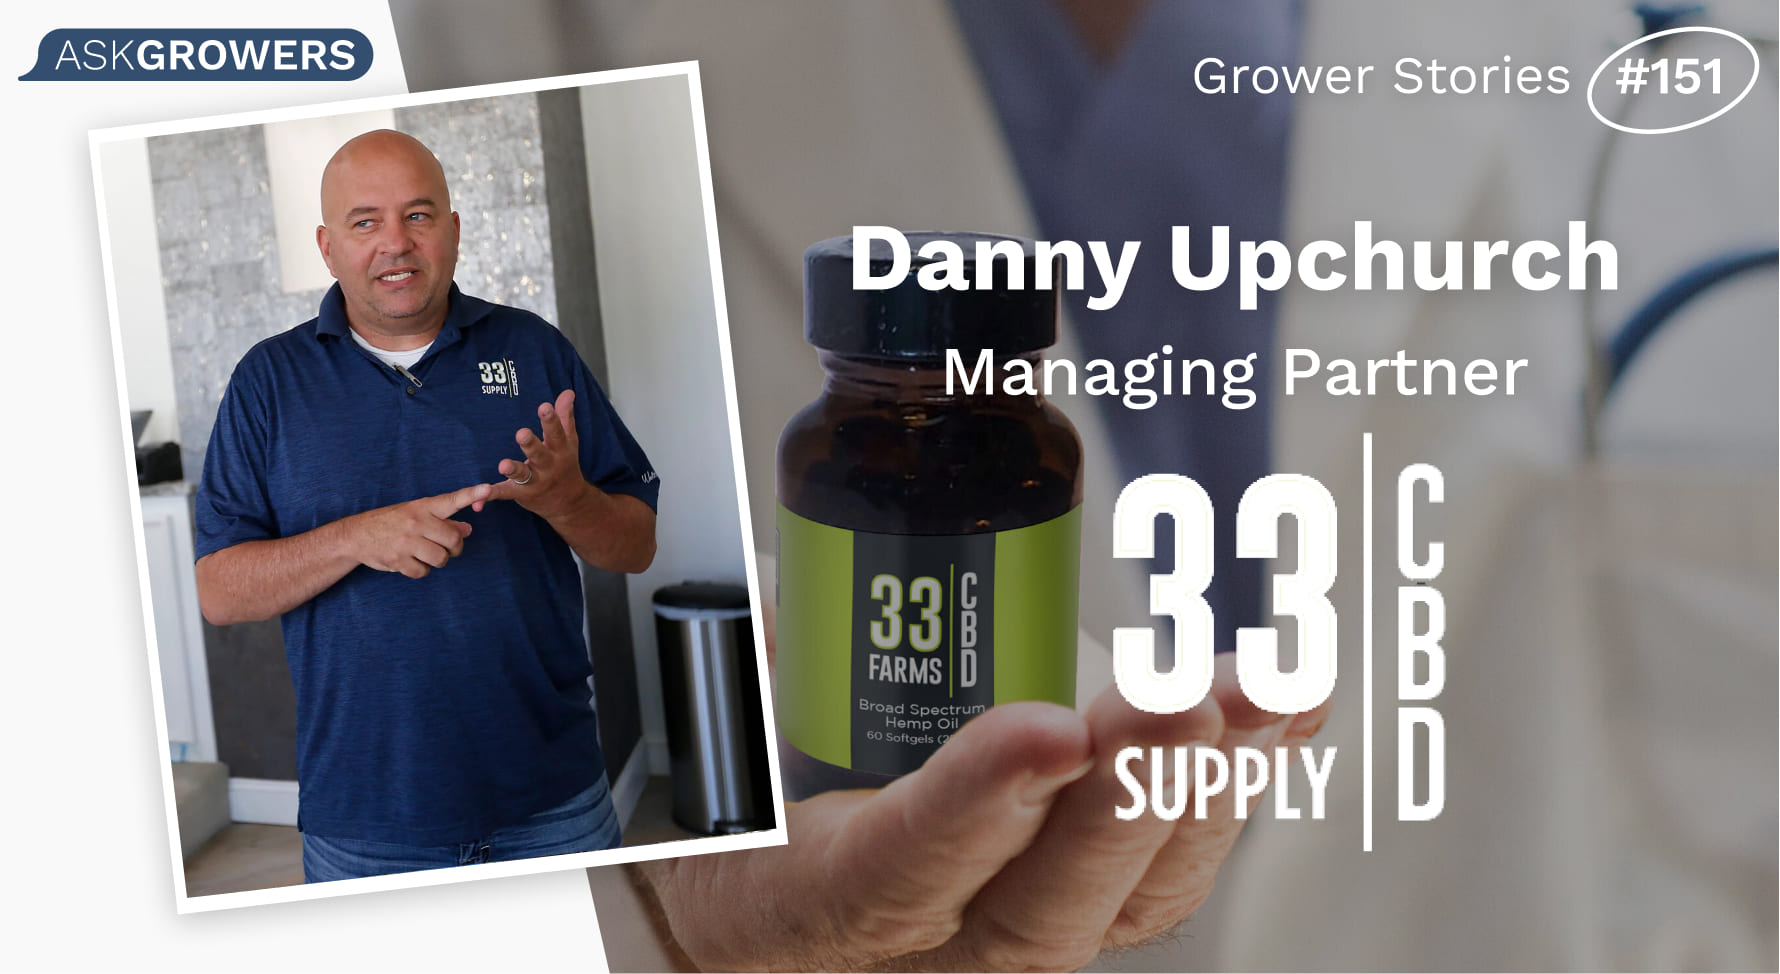 Grower Stories #151: Danny Upchurch, AskGrowers